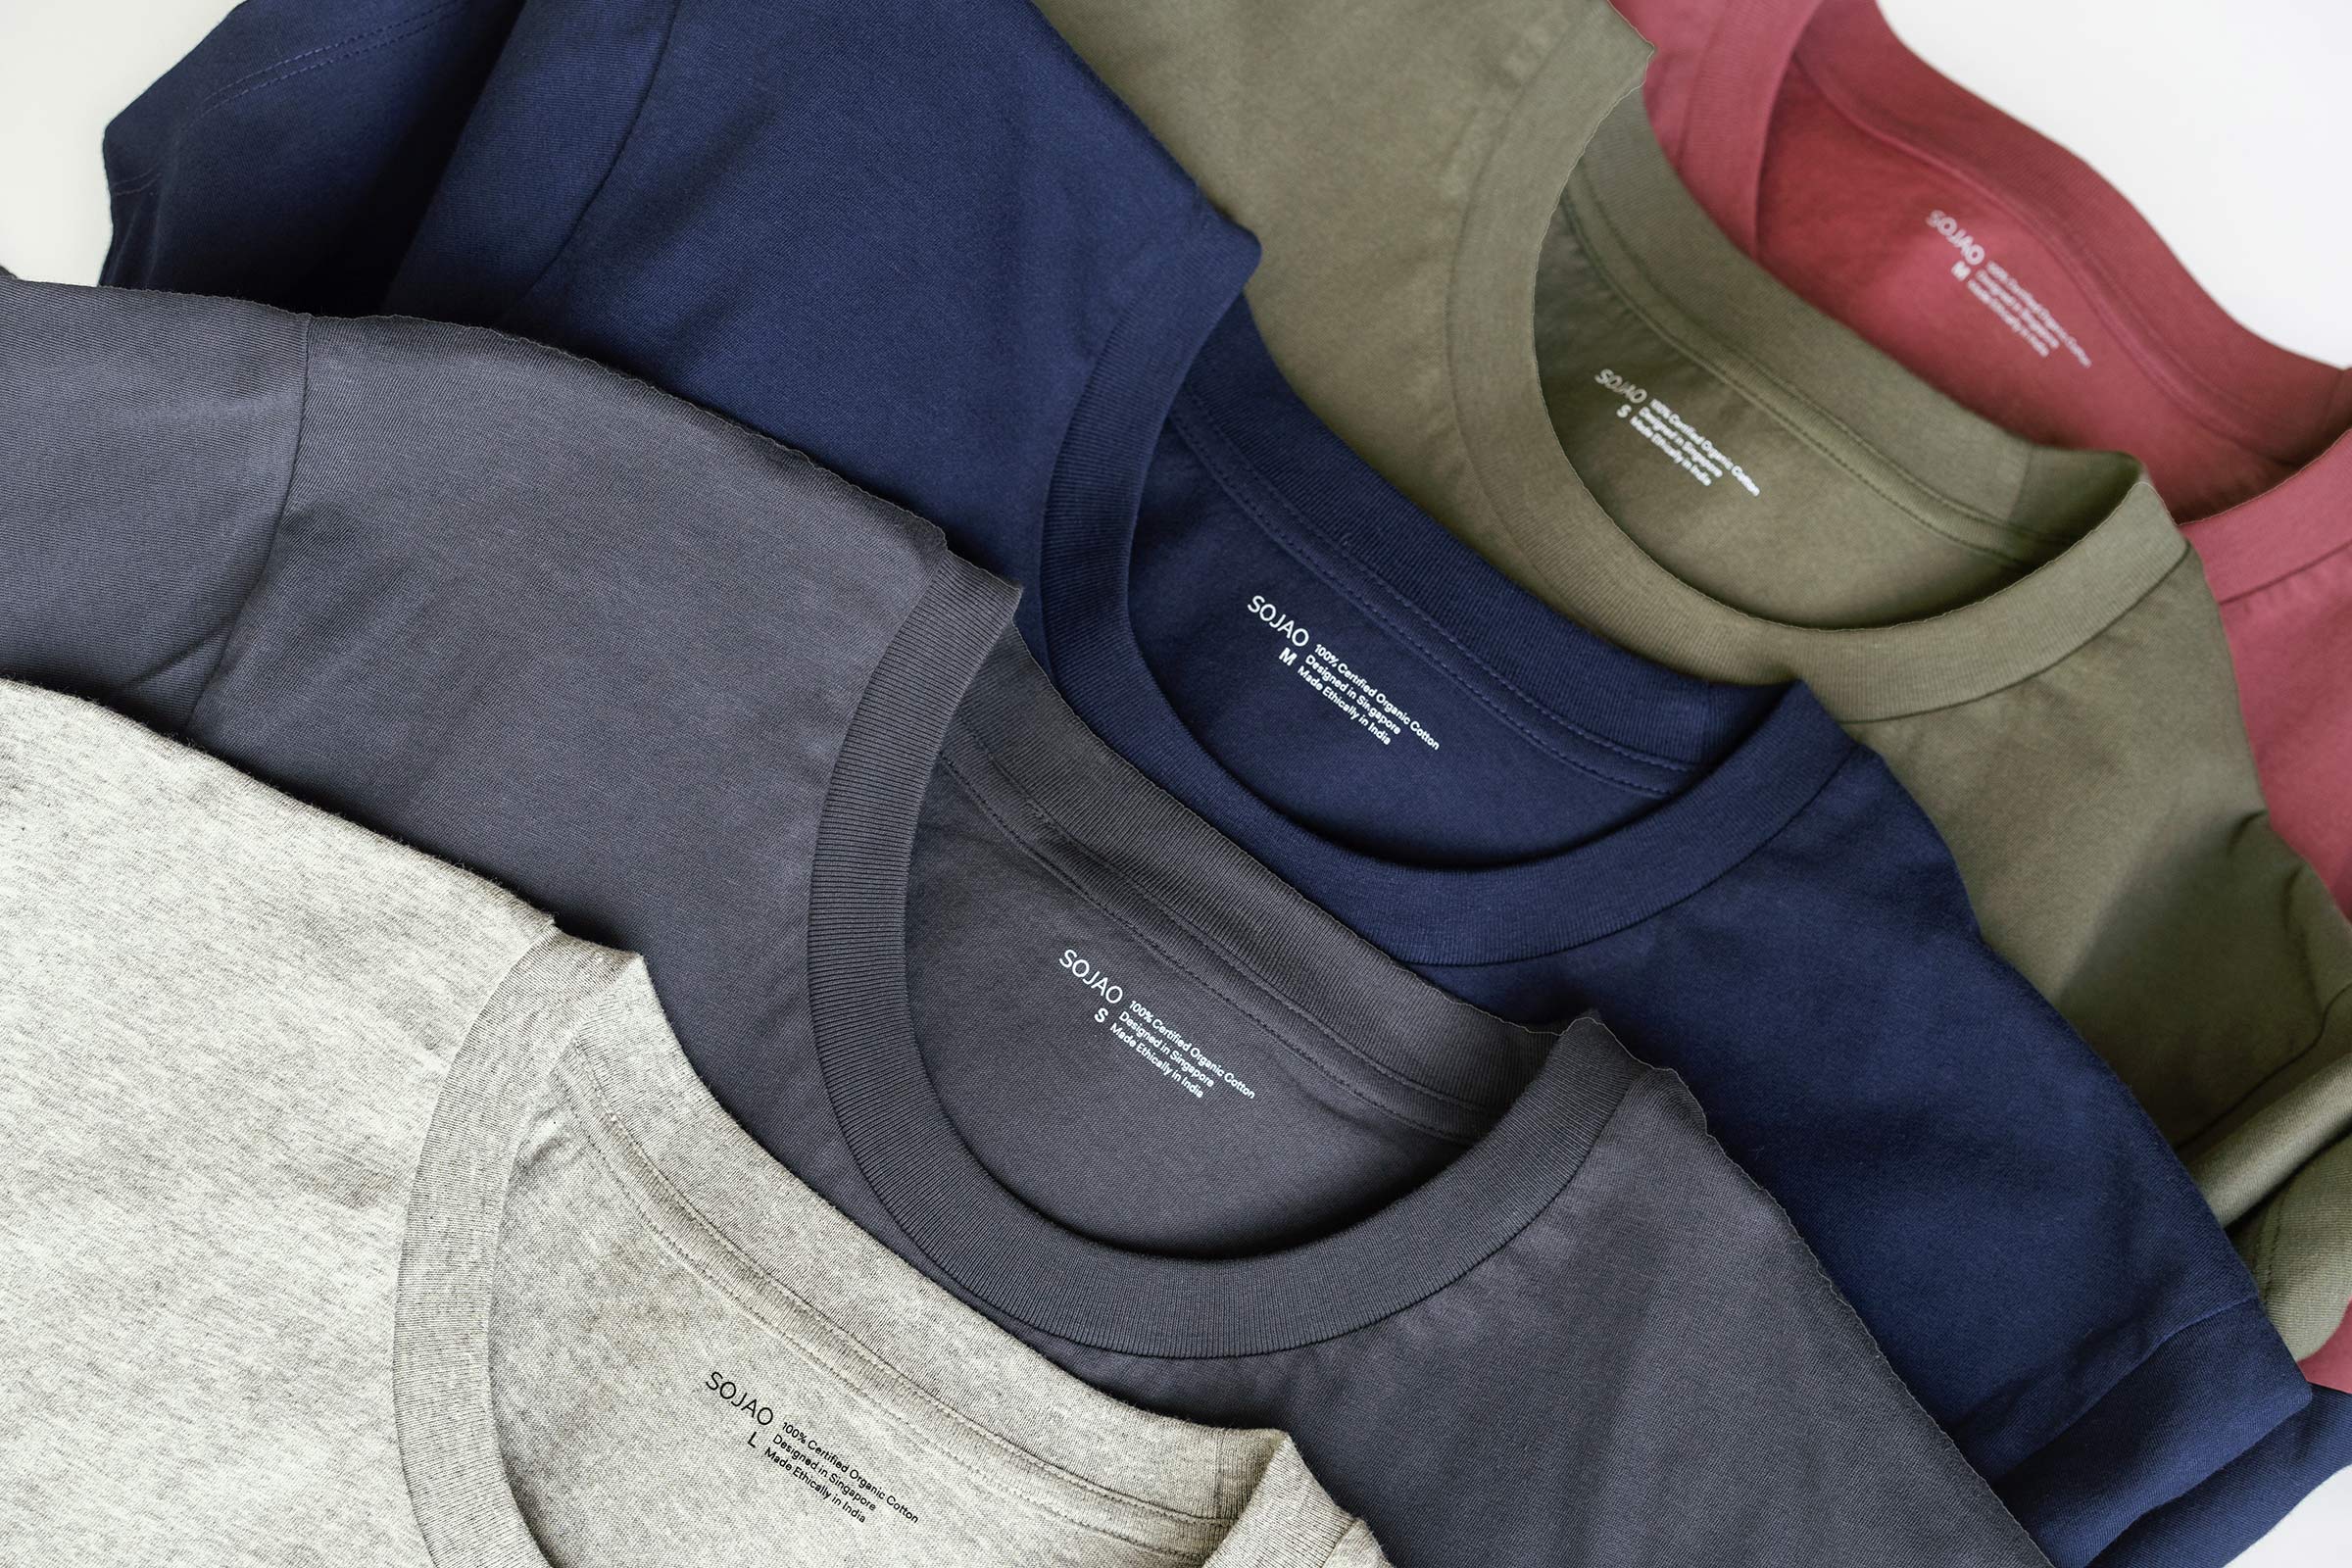 pebbles-midnight-navy-olive-rouge-organic-cotton-mens-tee-bundle-close-up-shot-by-sojao.jpg